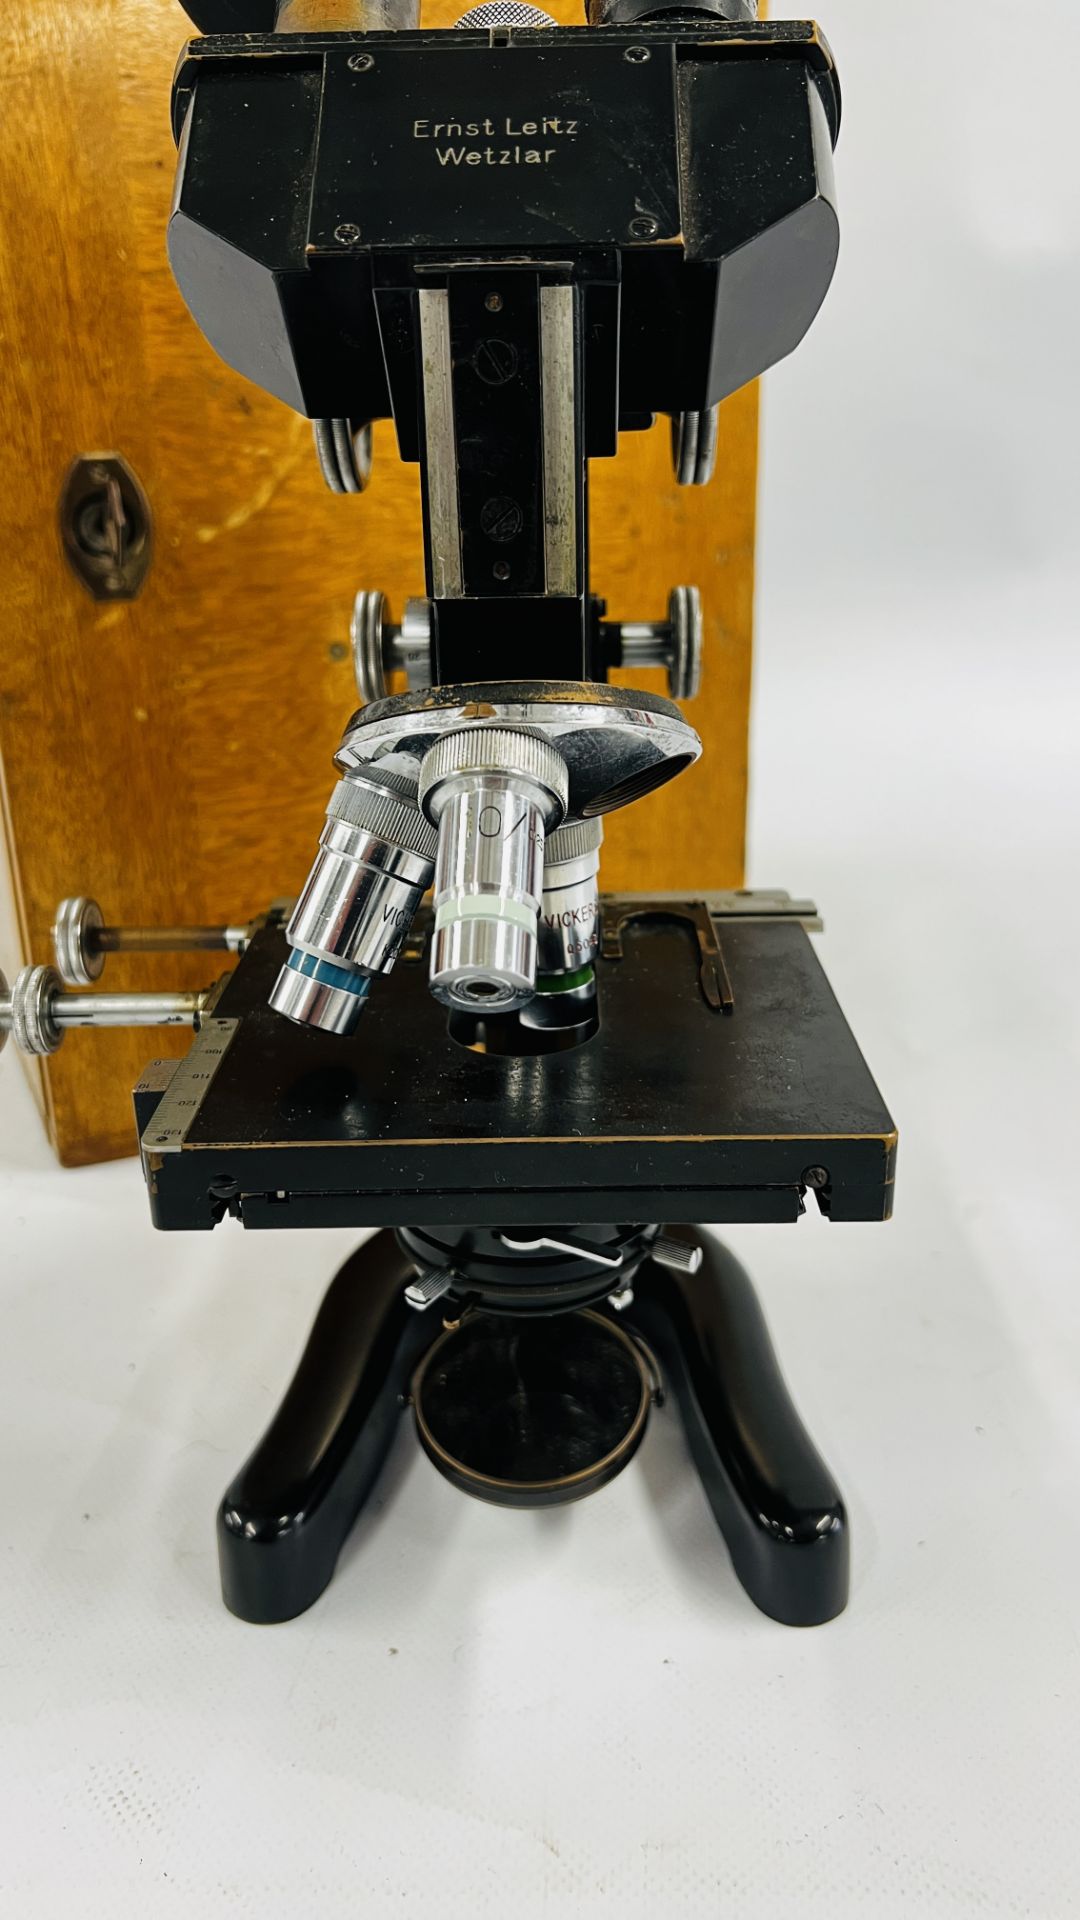 A VINTAGE CASED MICROSCOPE MARKED "WETZLAR" - W 26 X D 25.5 X H 40CM. - Image 3 of 7